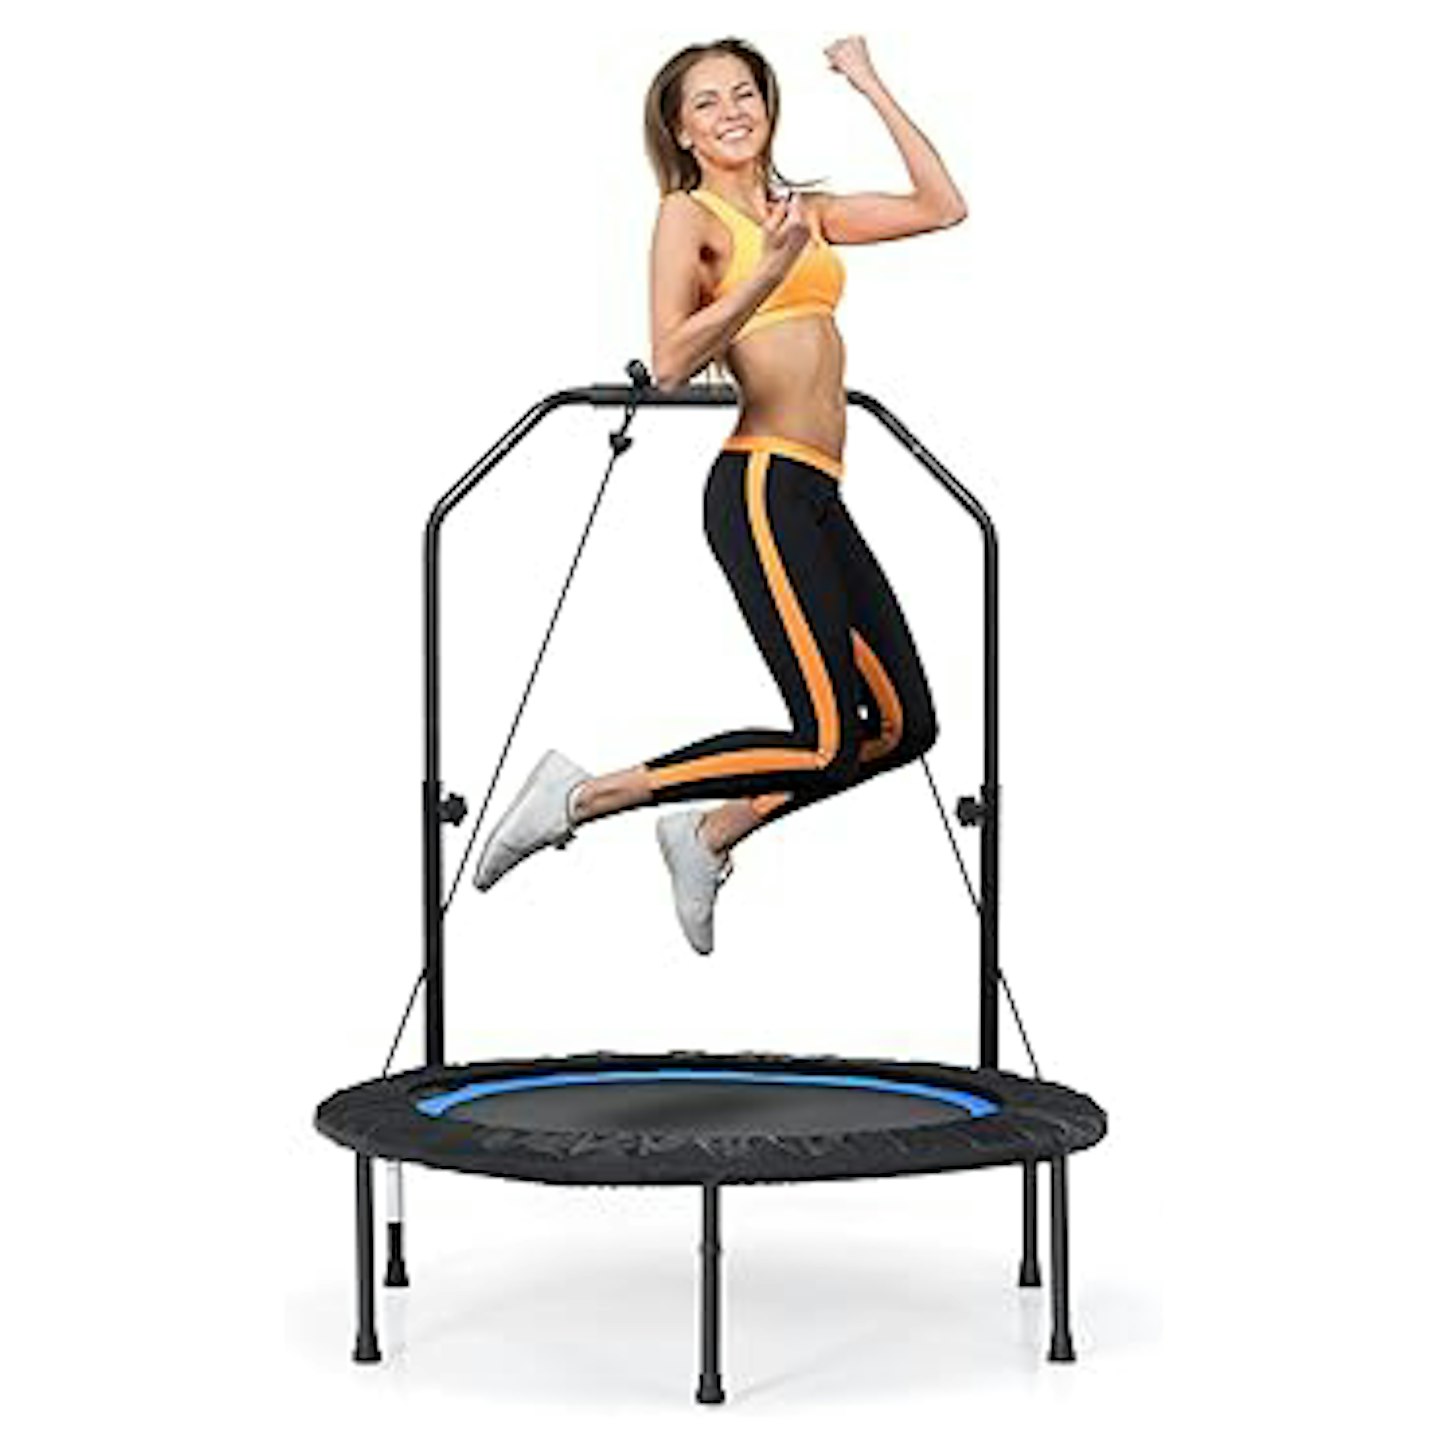 Costway mini trampoline for home workouts